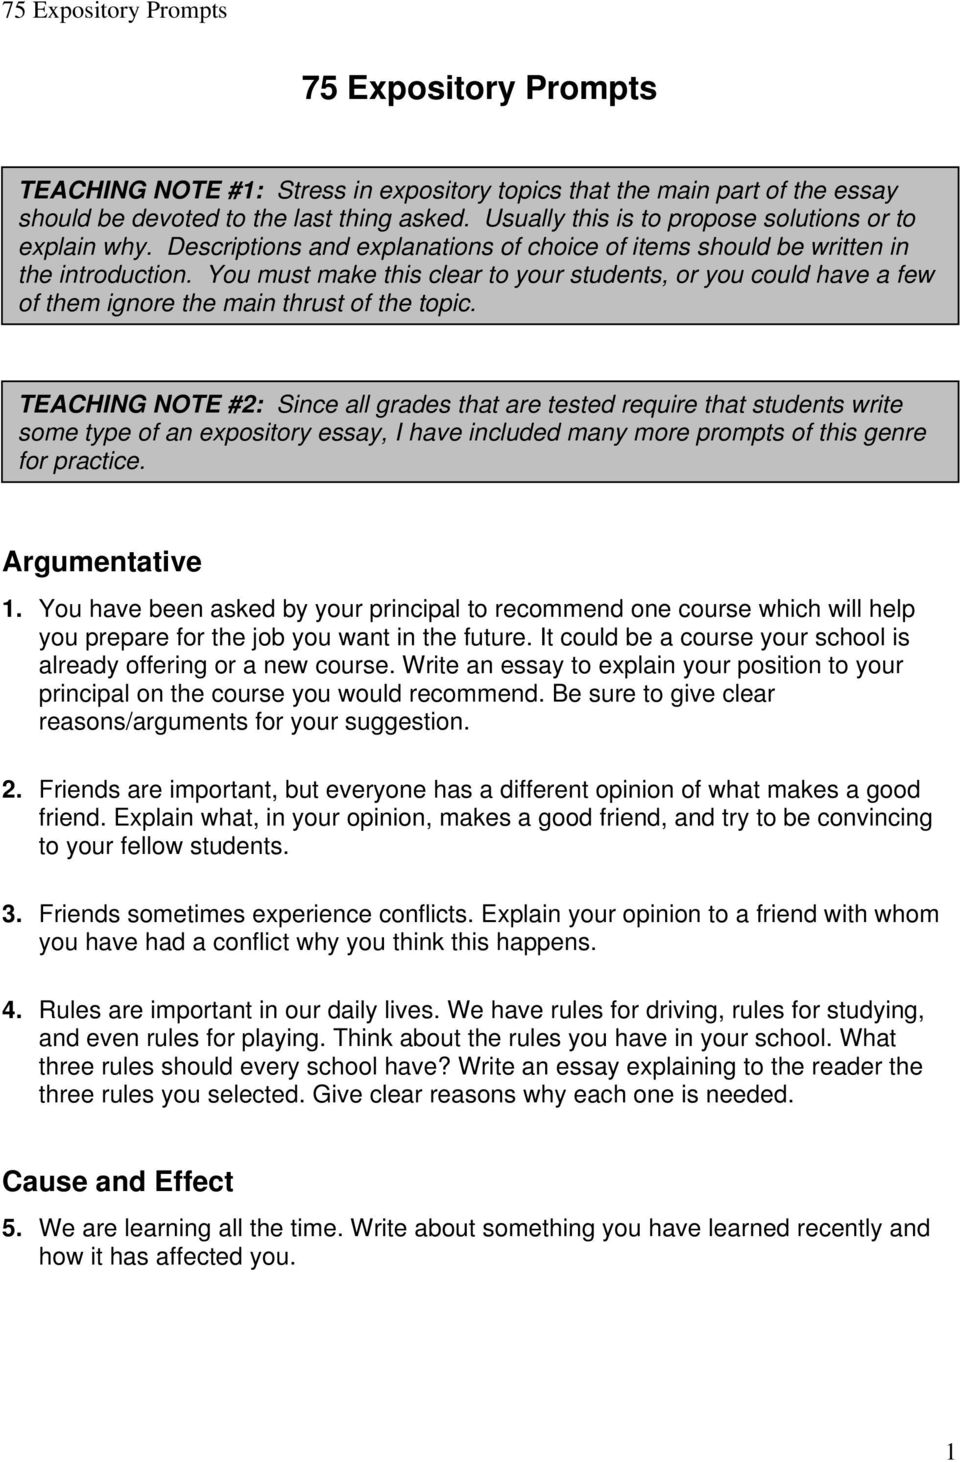 Rules for writing a expository essay